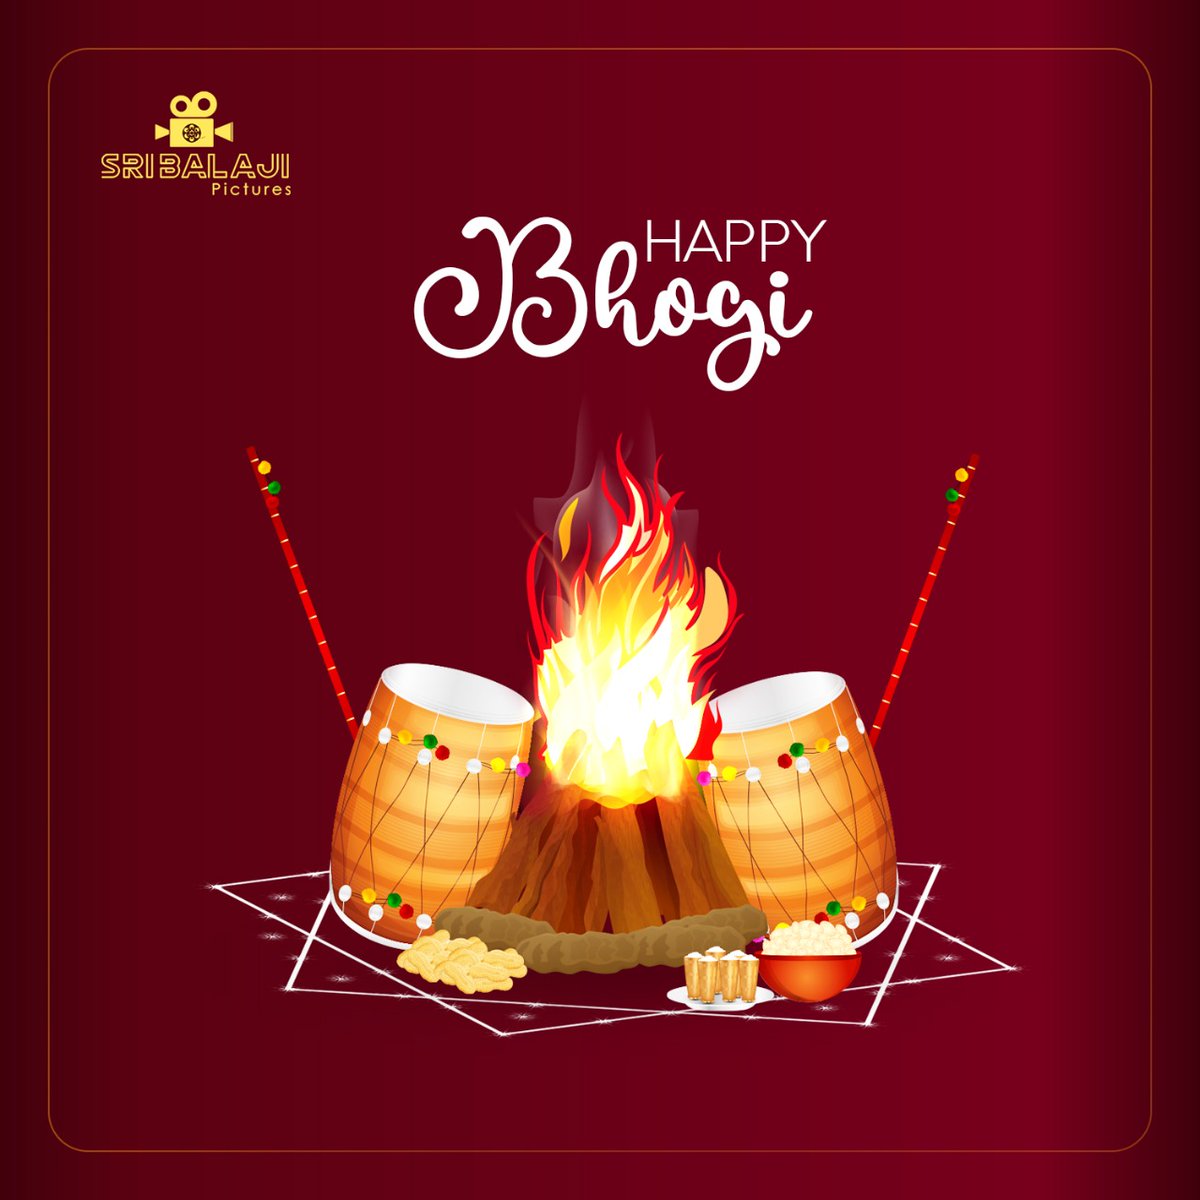 We wish you and your family a very happy Bhogi and a happy year ahead.!🎉🎉
#HappyBhogi
#SriBalajiPictures